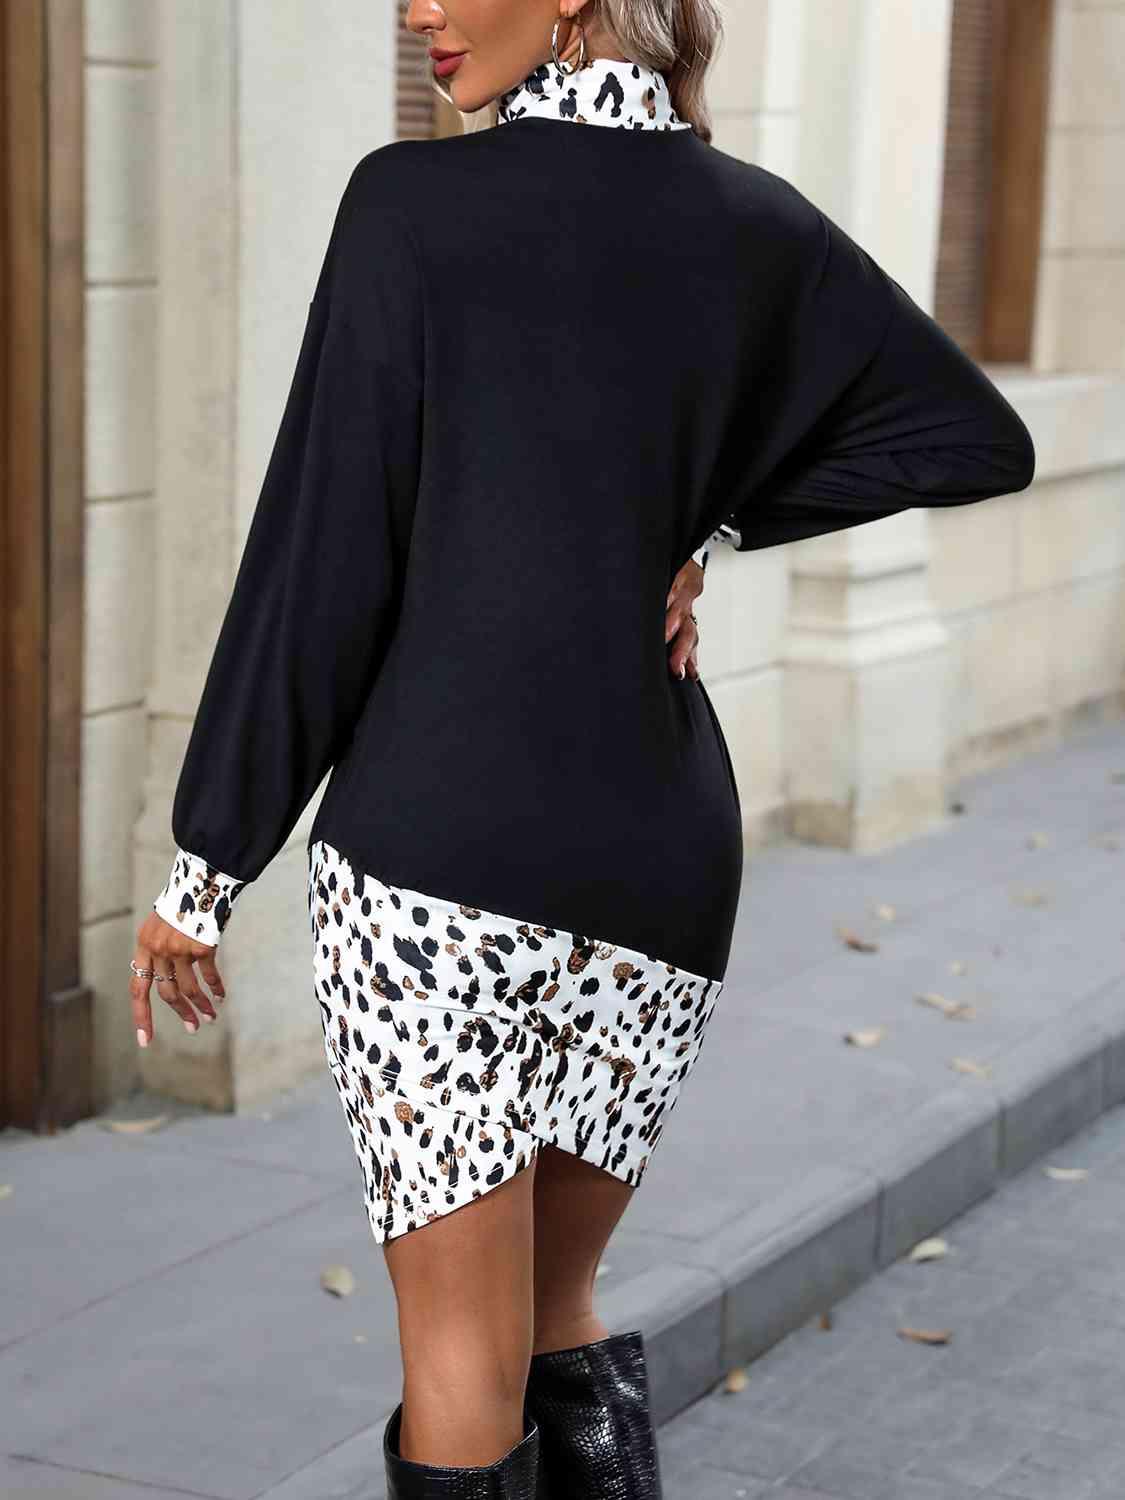 a woman in a black sweater and leopard print skirt